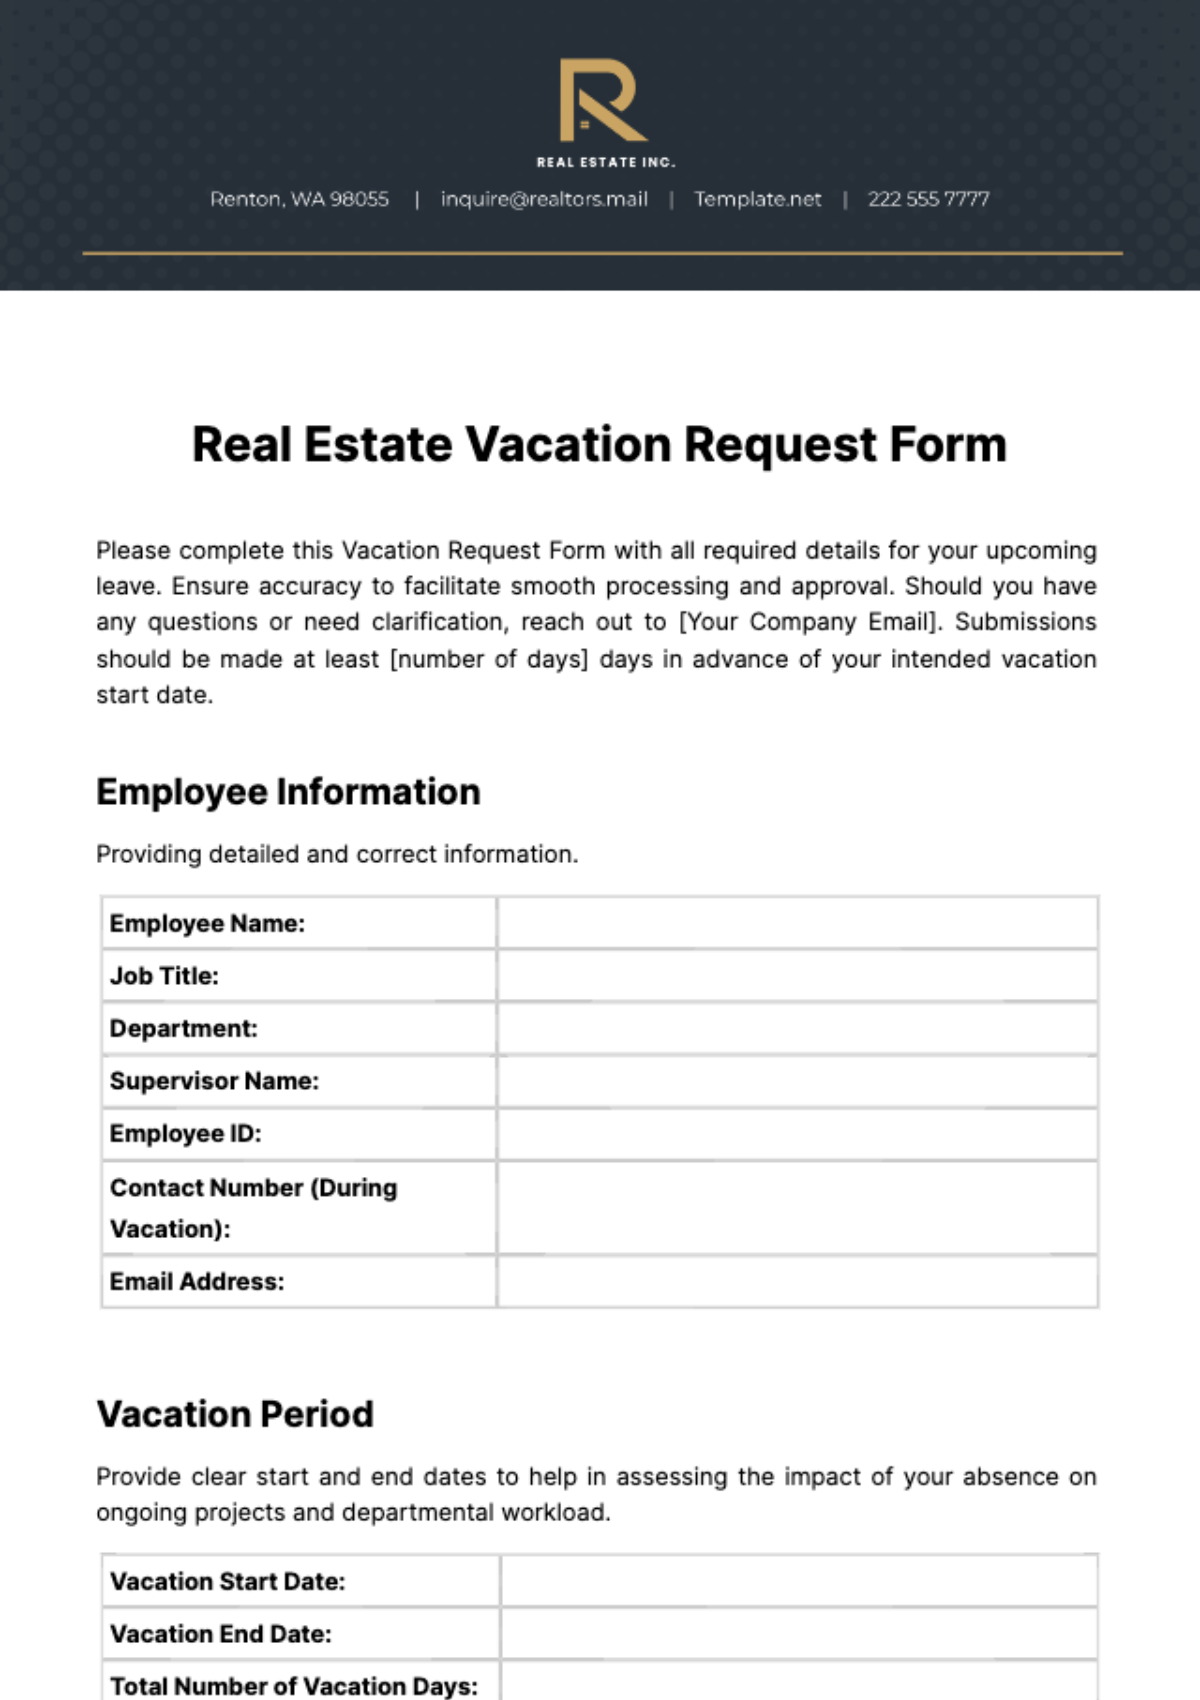 Real Estate Vacation Request Form Template